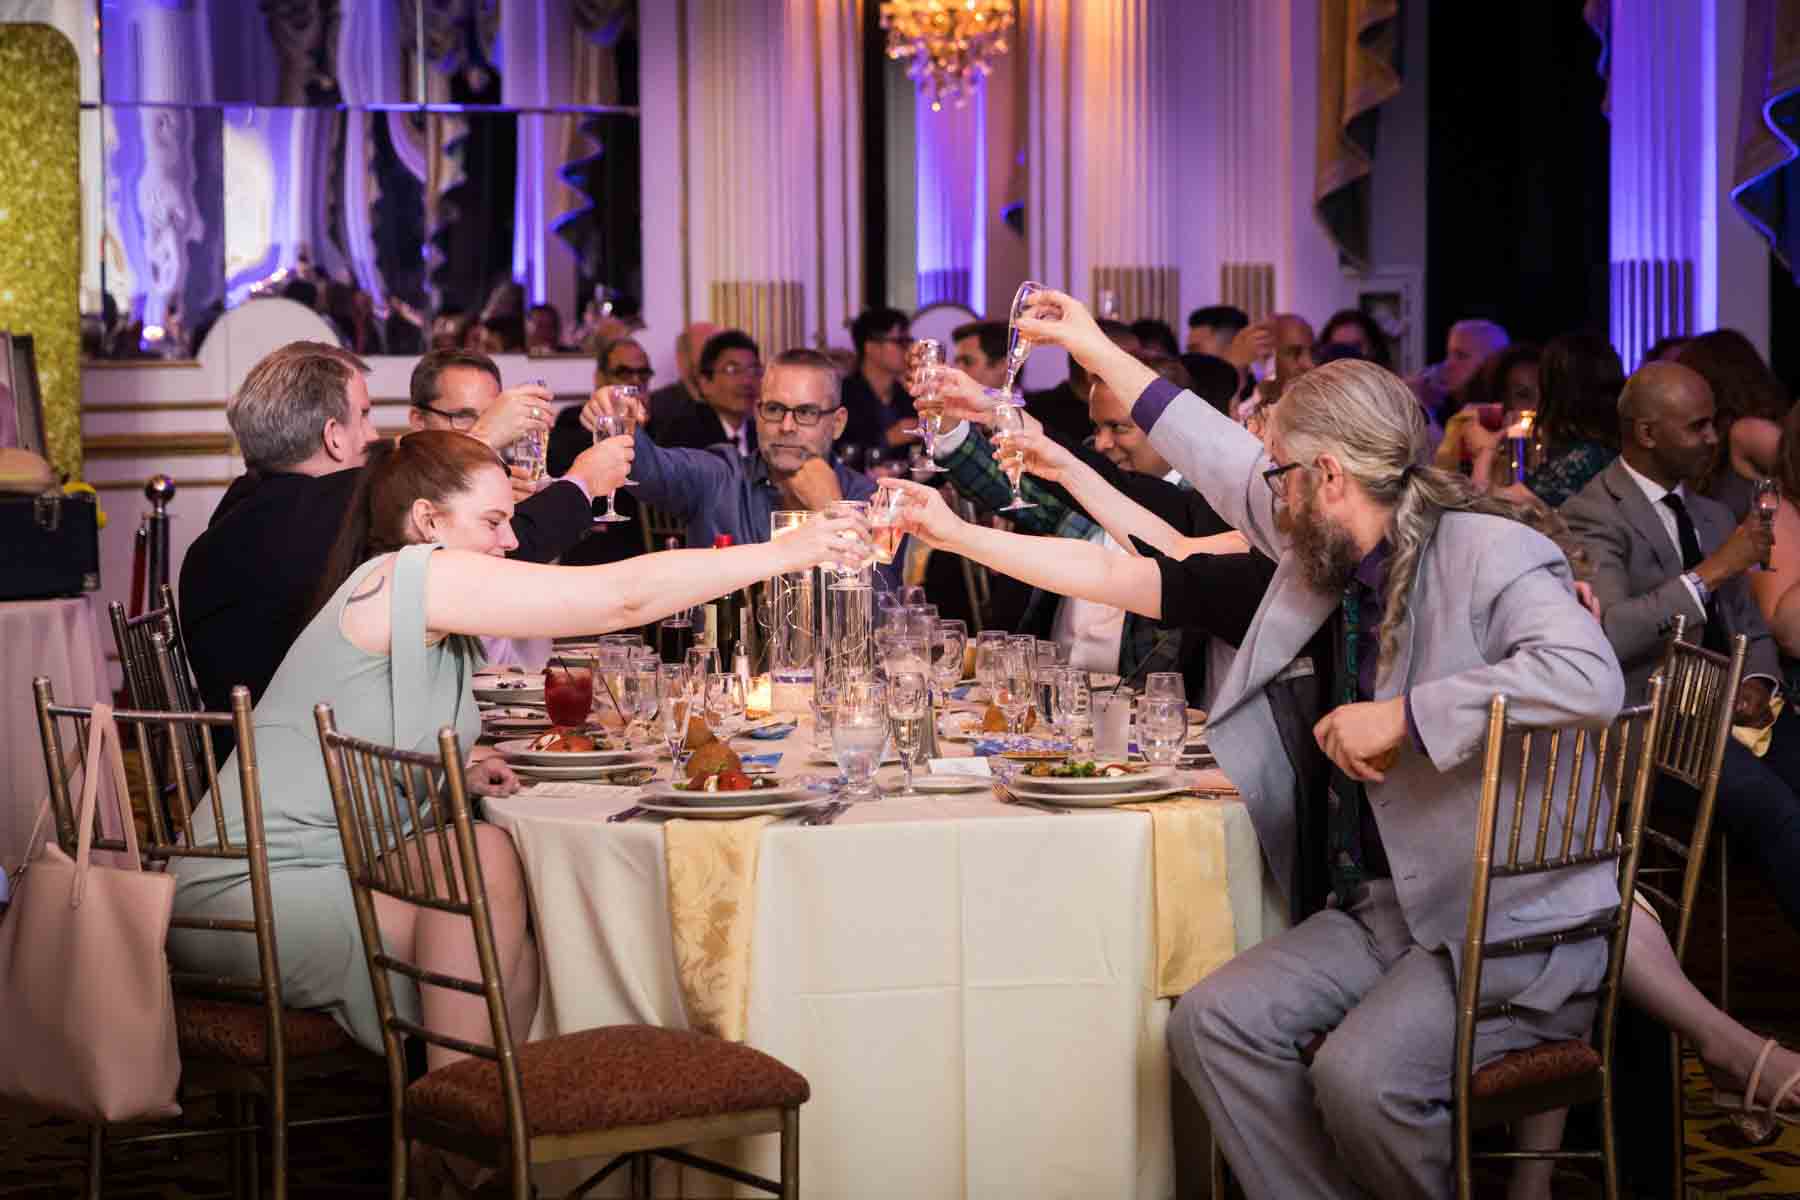 Guests at a table clinking glasses after a speech at a Terrace on the Park wedding